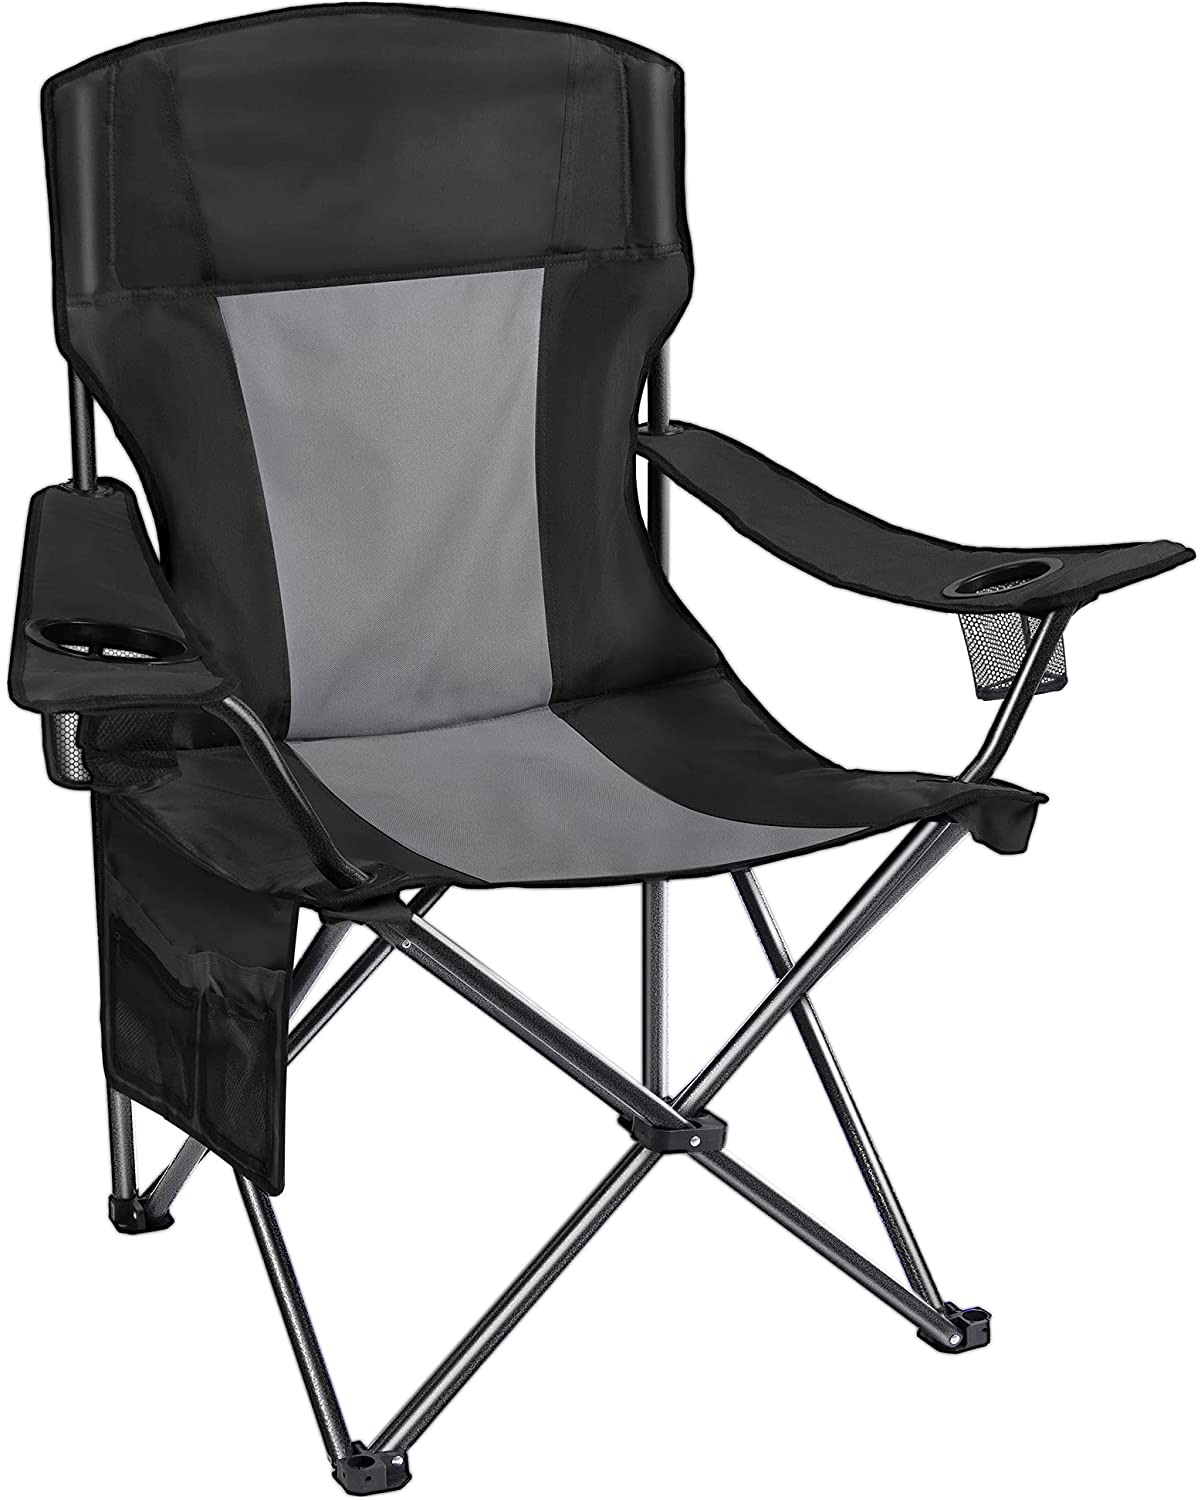 Purchase folding camping chairs